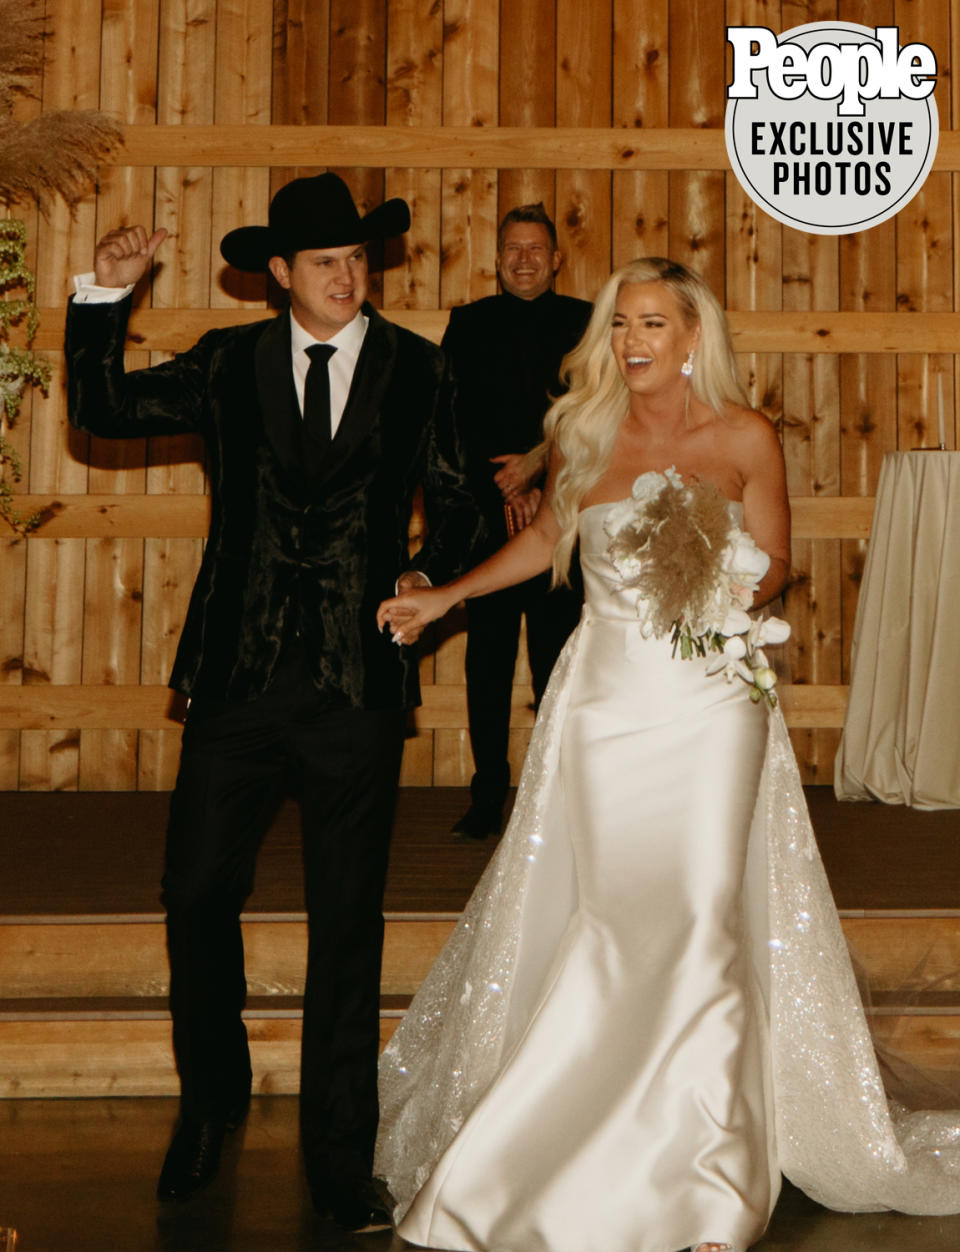 <p>Pardi's longtime friend and stylist, John Murphy, married the couple.</p> <p>"He knows us so well," Duncan said. "With it being such a special moment, we wanted someone who knows us inside and out and who we feel a connection with."</p>